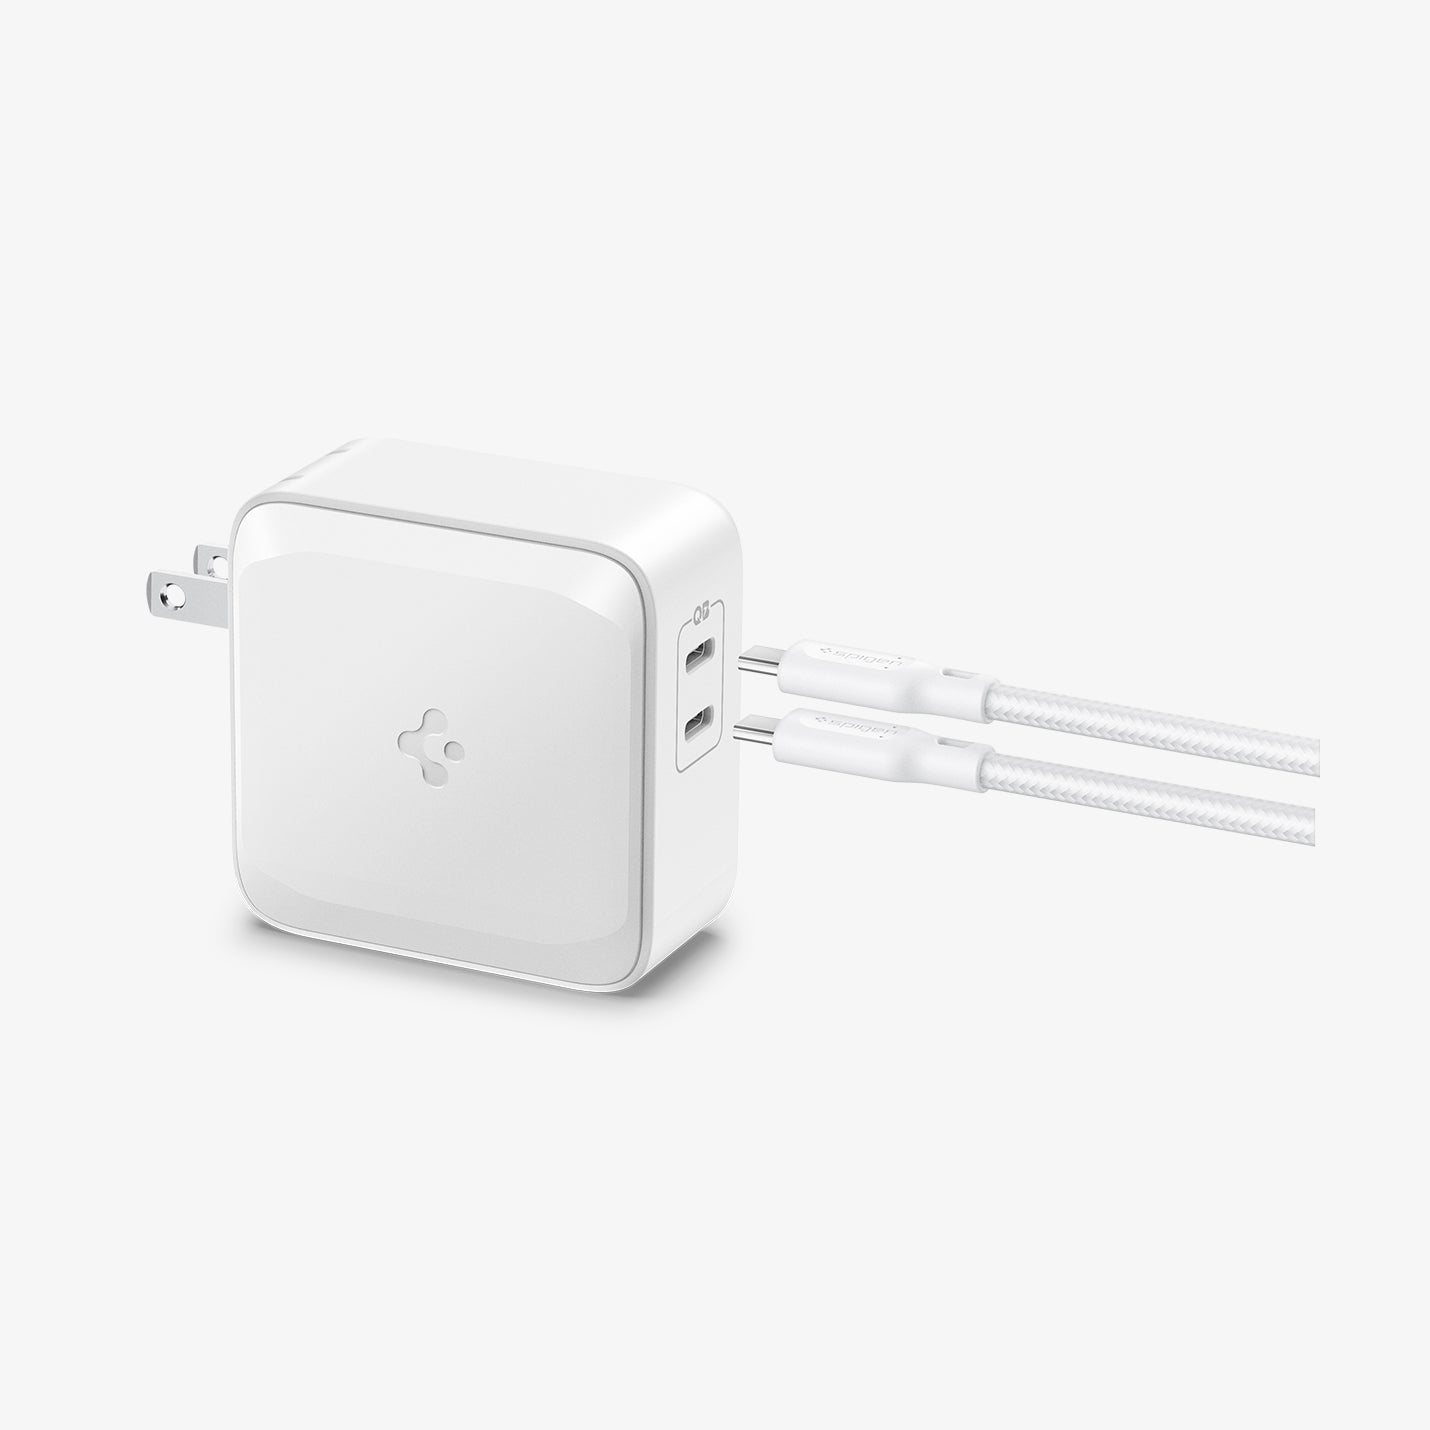 ACH02081 - ArcStation™ Pro GaN 70W Dual Port Wall Charger PE2007 in White showing the sides and top of a charger with 2 charger cord hovering beside two usb c-type ports